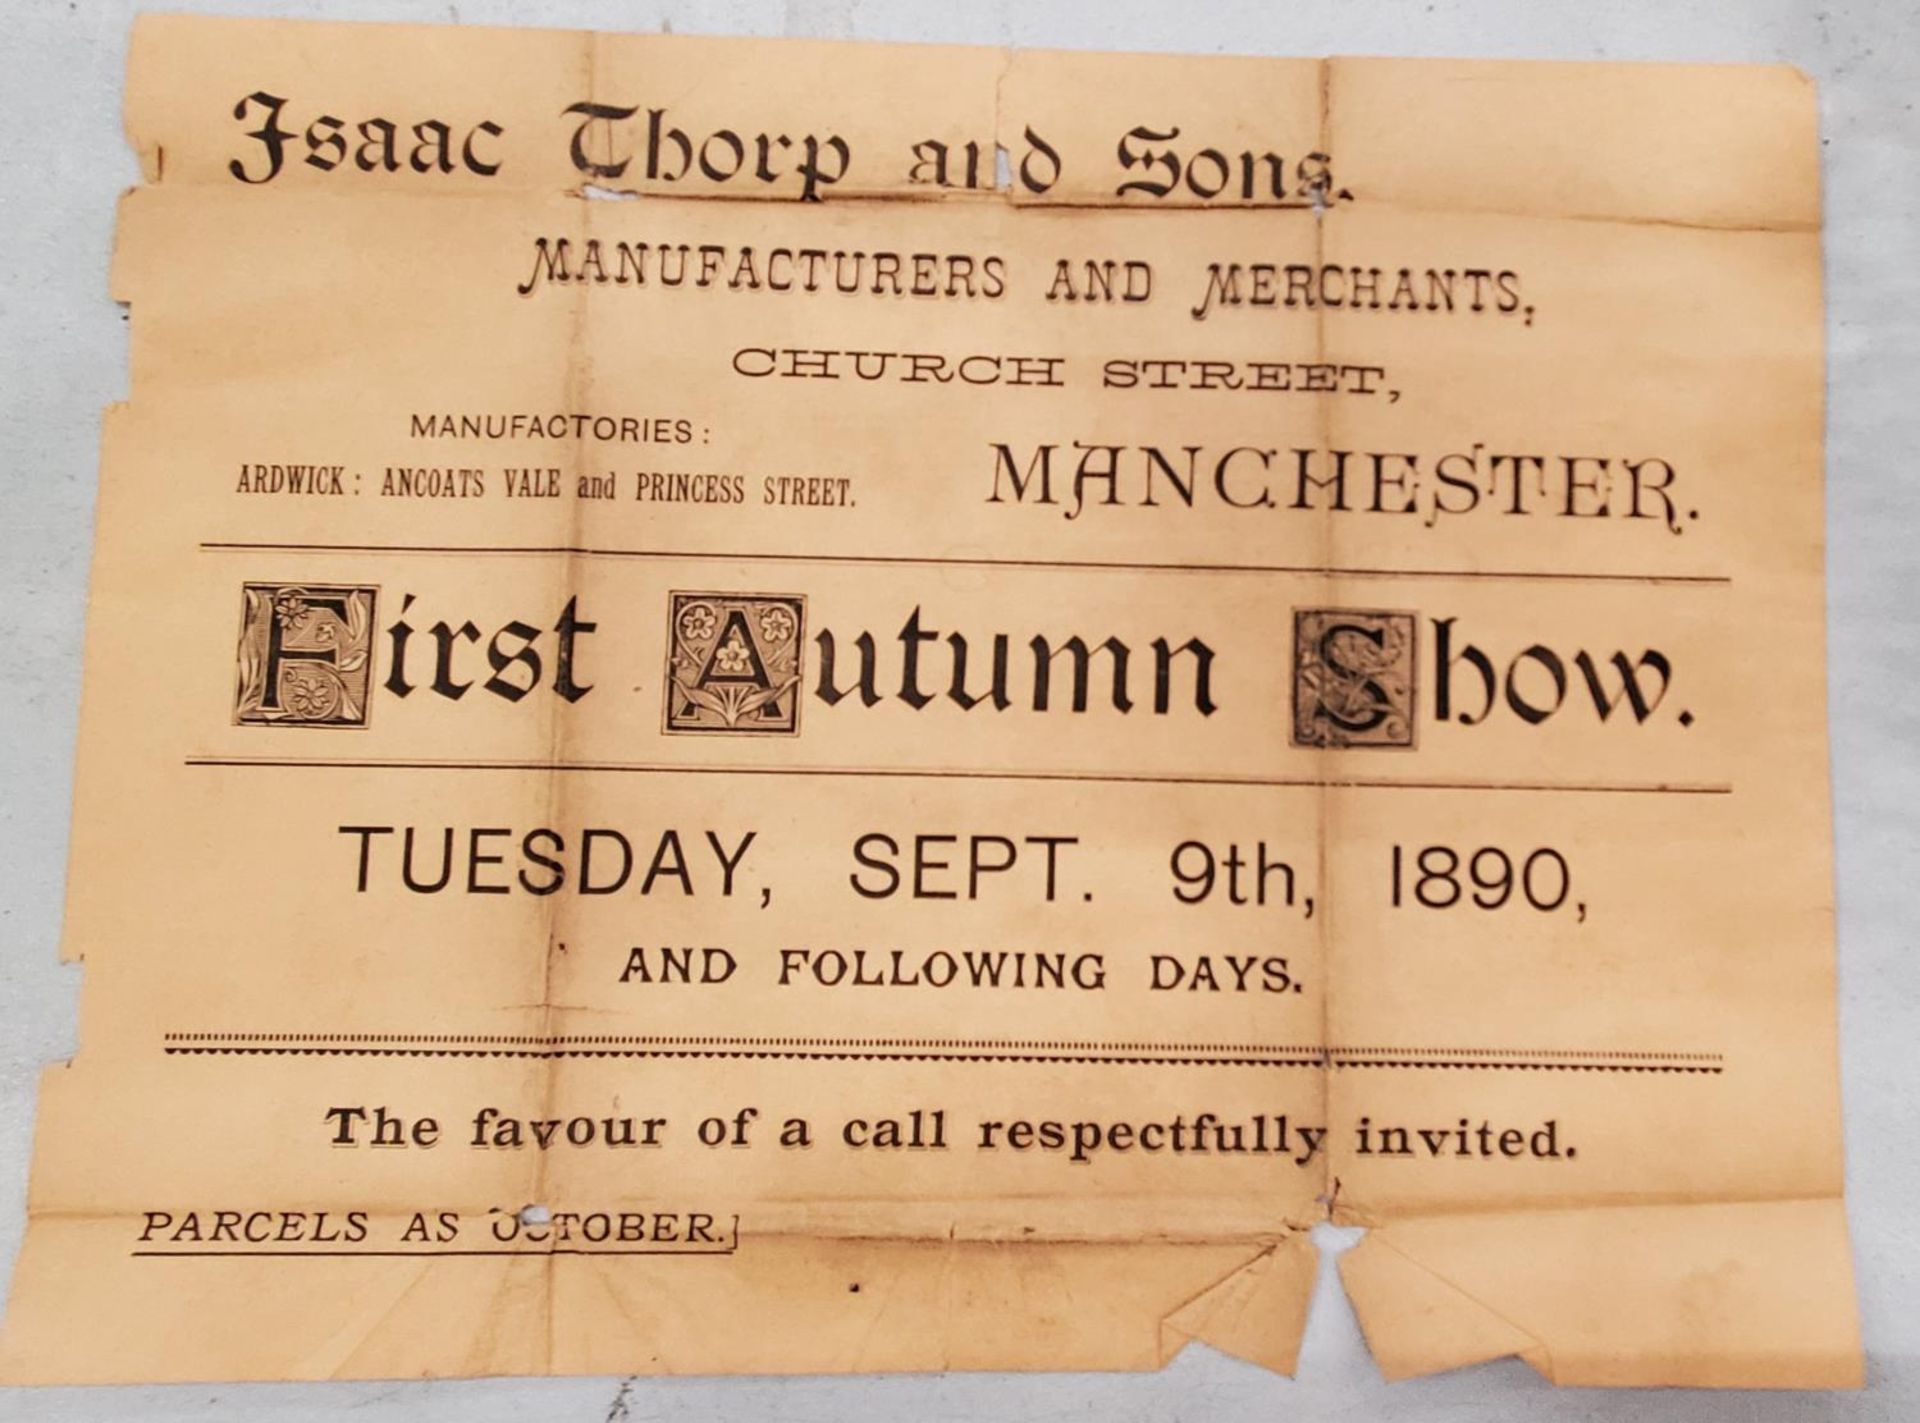 AN ORIGINAL 1890 RAILWAY AND CANALS ADVERTISING LEAFLET, MANCHESTER - Image 2 of 2